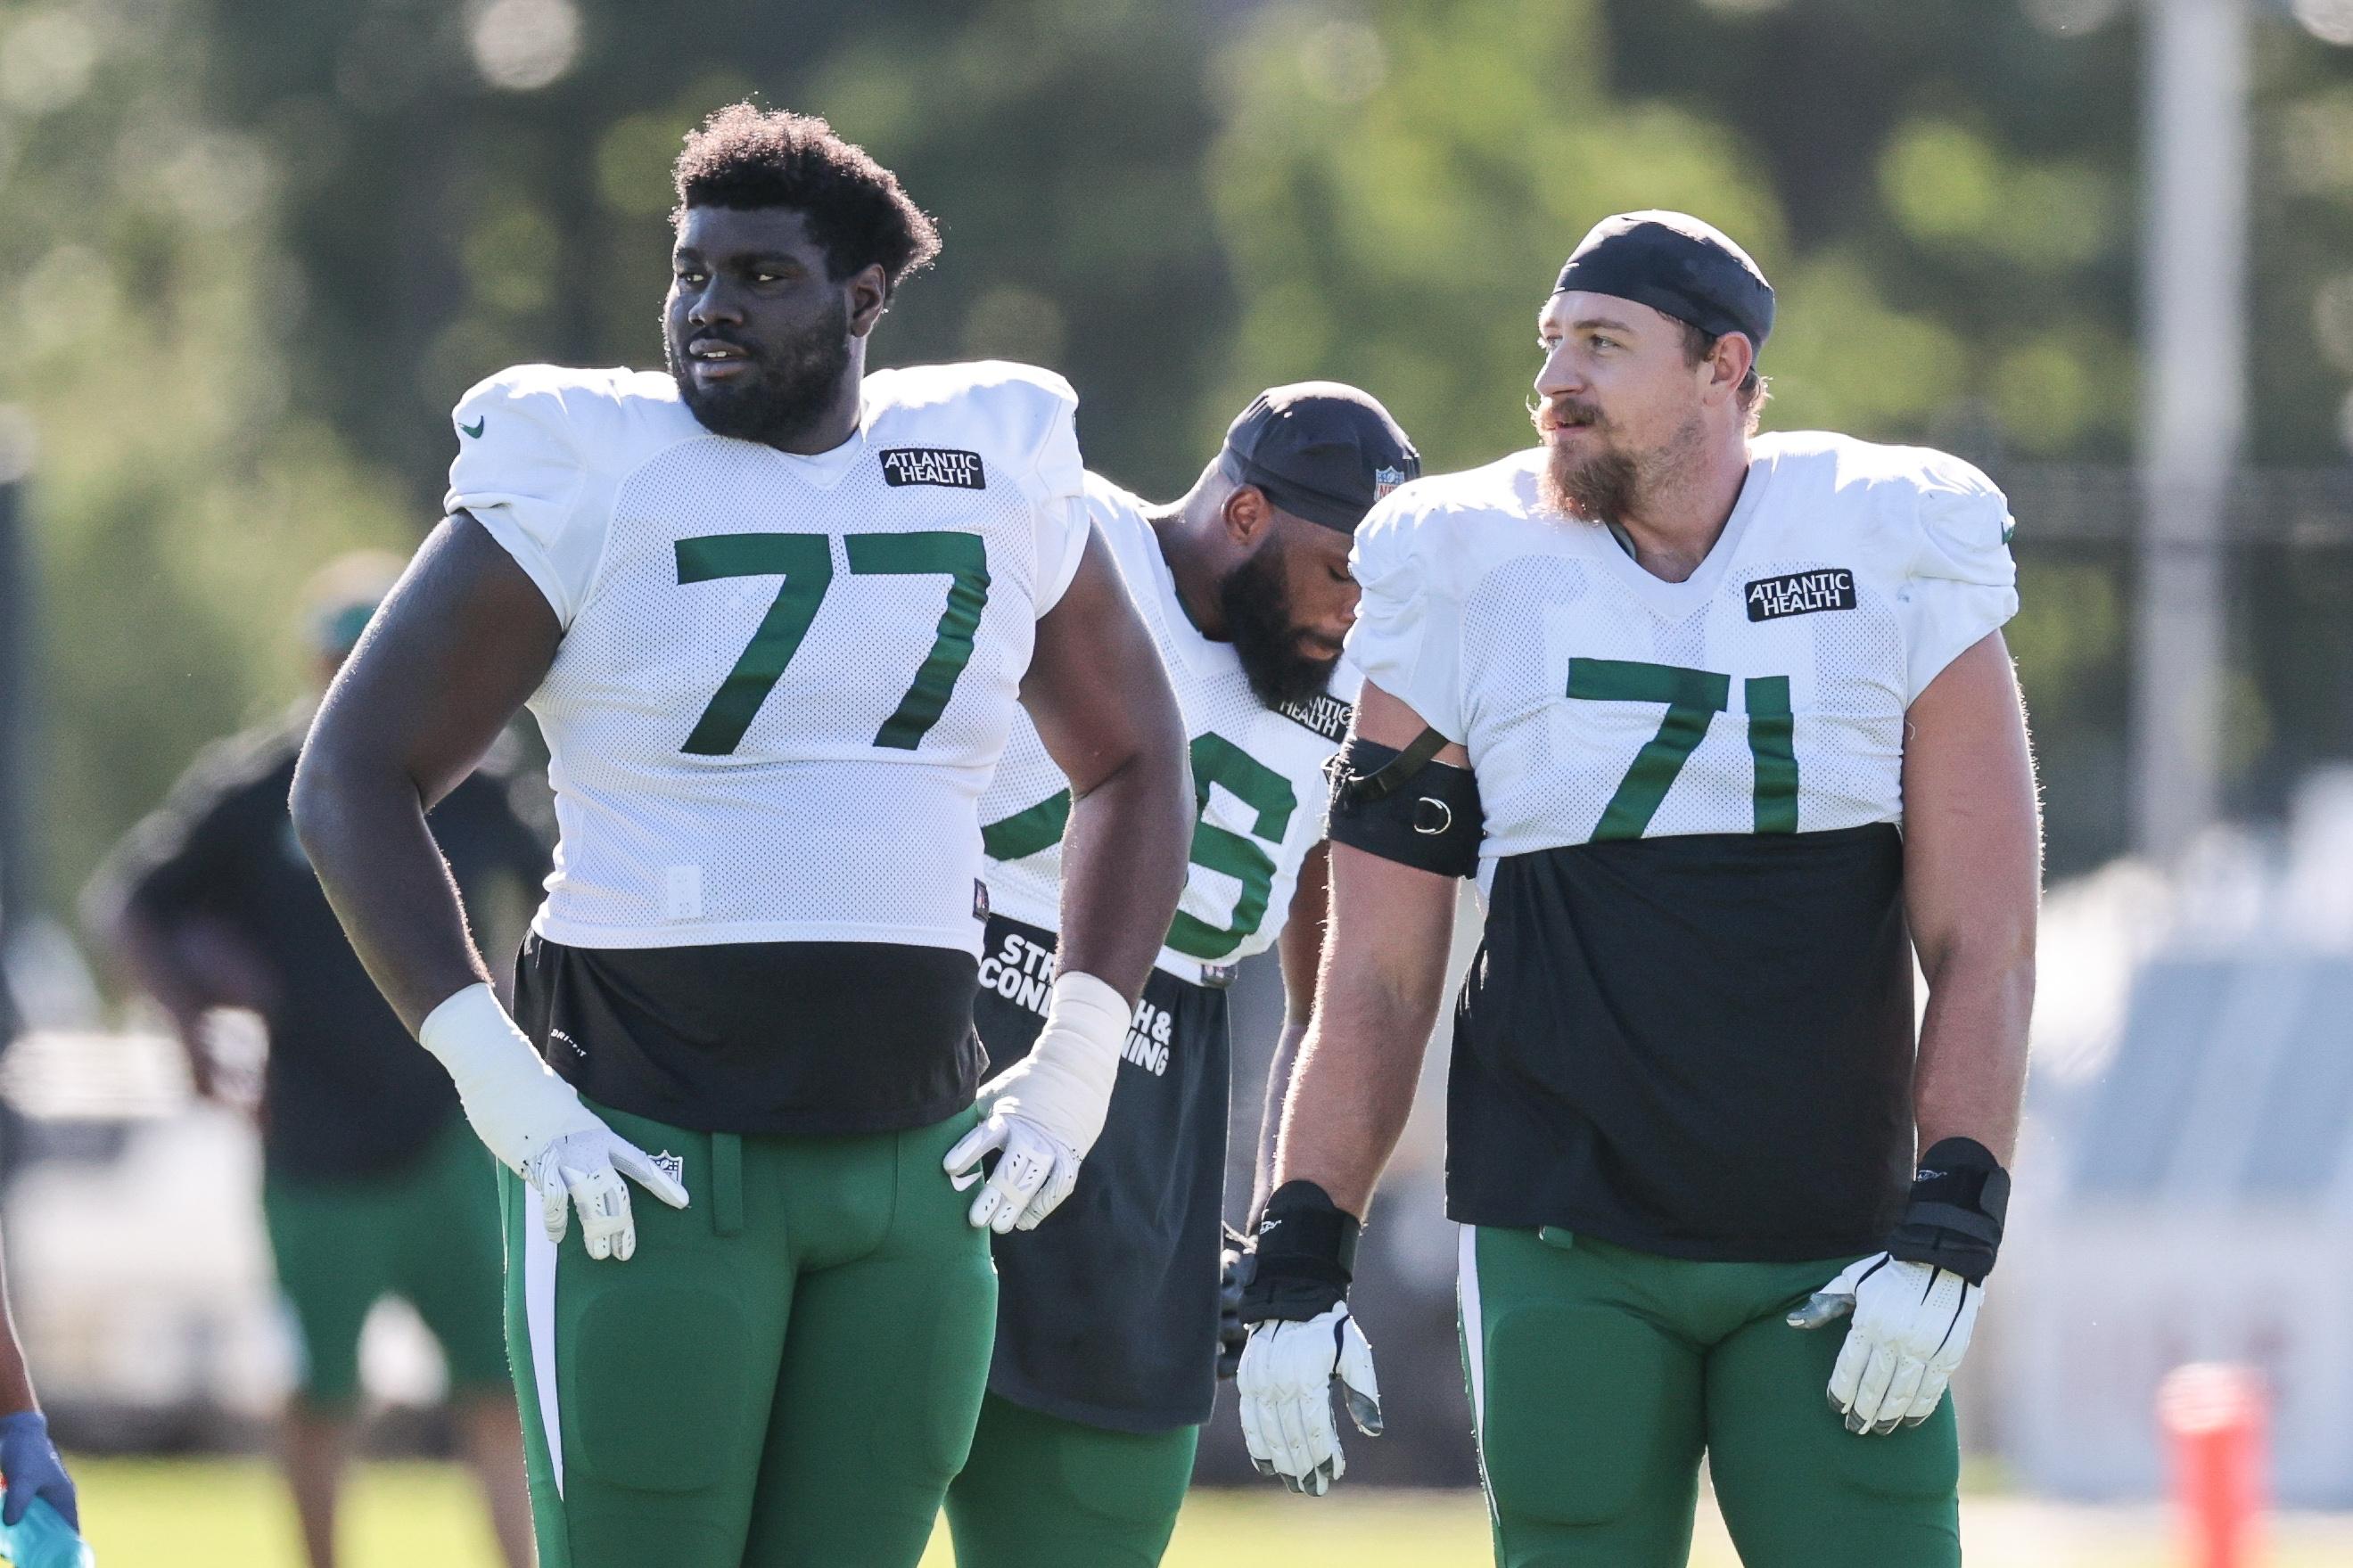 Aug 20, 2020; Florham Park, New Jersey, USA; New York Jets offensive tackle Mekhi Becton (77) and guard Alex Lewis (71) look on during training camp at Atlantic Health Center. Mandatory Credit: Vincent Carchietta-USA TODAY Sports / Vincent Carchietta-USA TODAY Sports